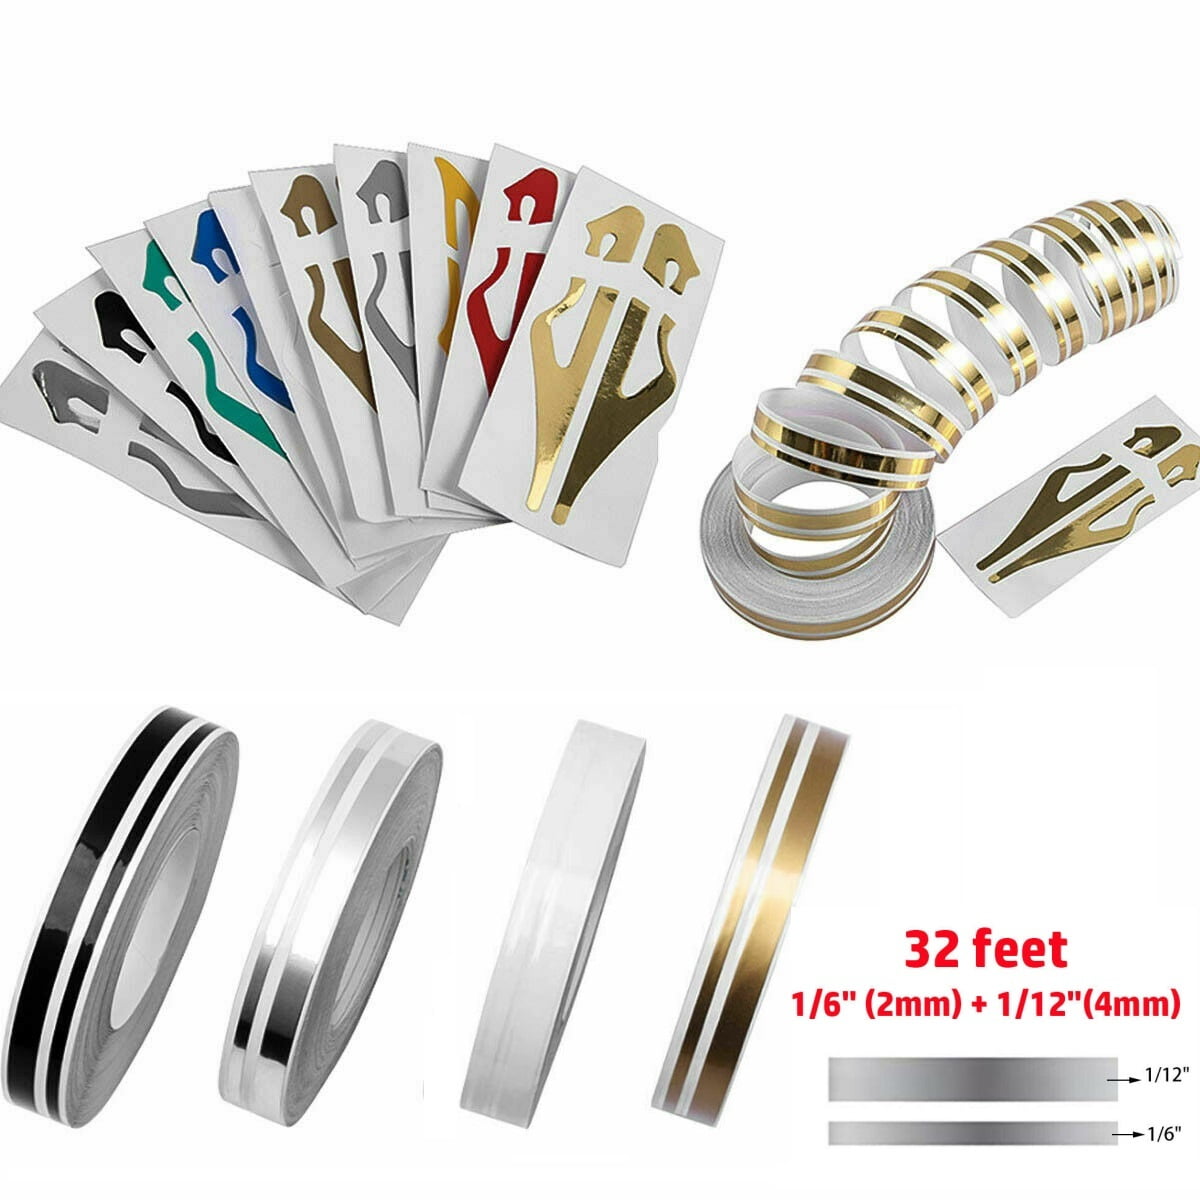 CHROME GOLD Roll Vinyl Pinstriping Pin Stripe Car Motorcycle Tape Decal Stickers